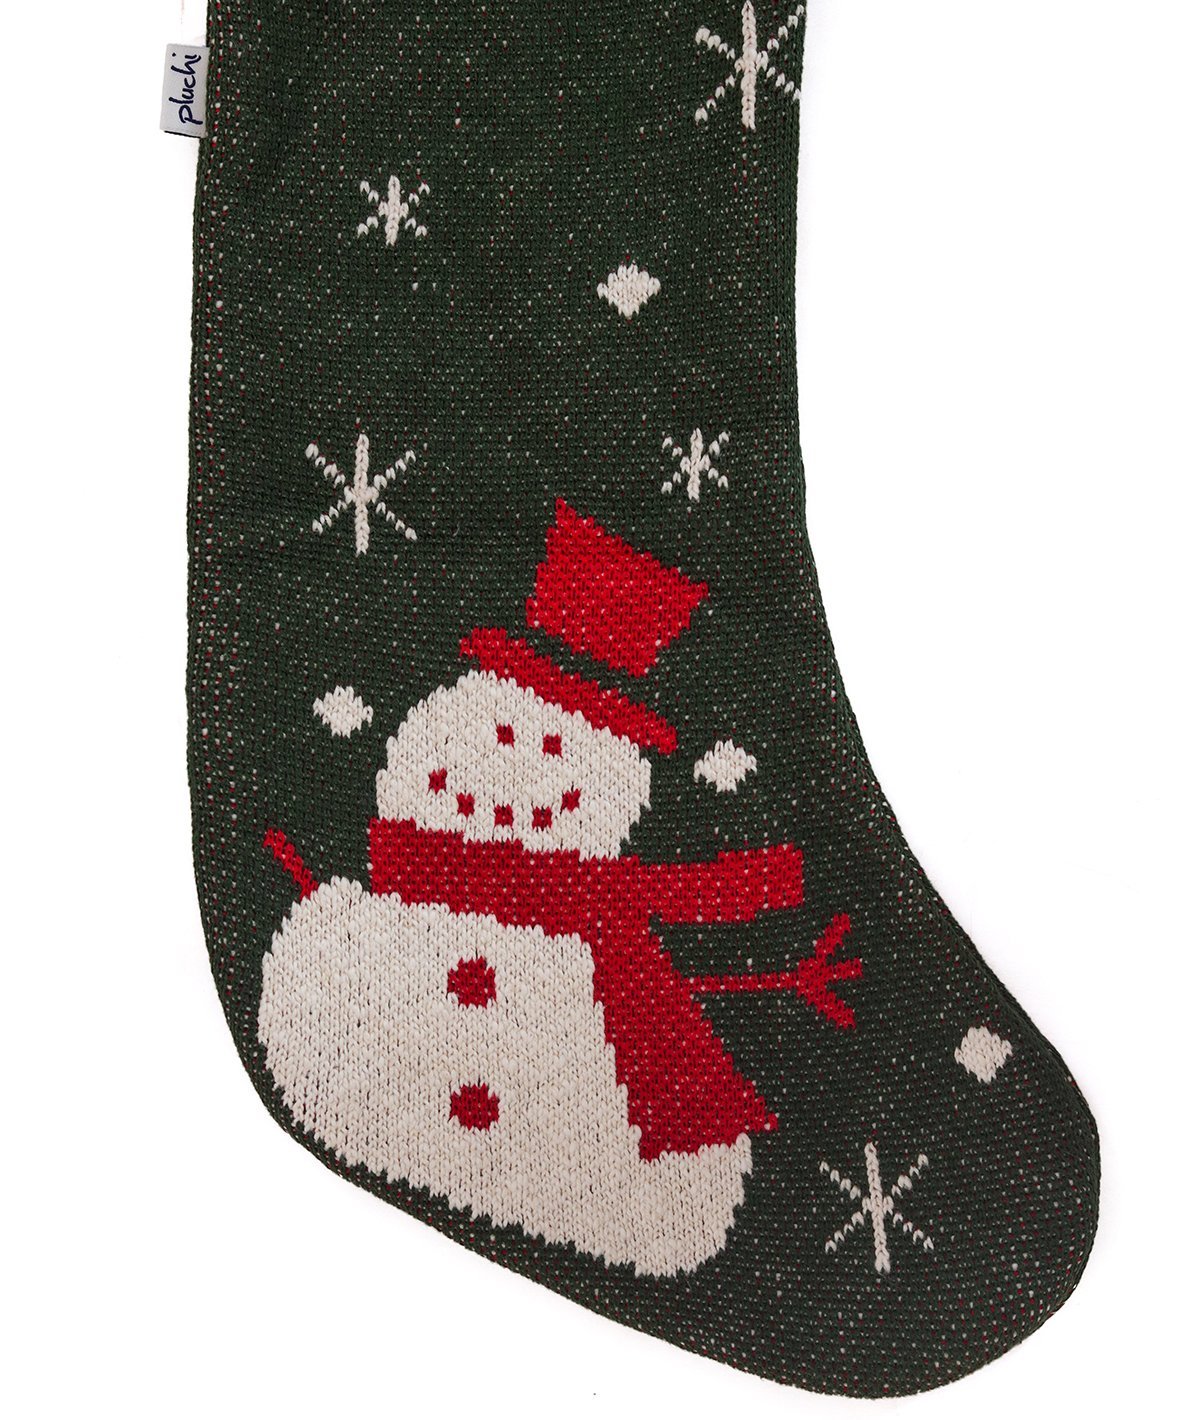 Snowman - Green & Red Cotton Knitted Christmas Decorative Stocking